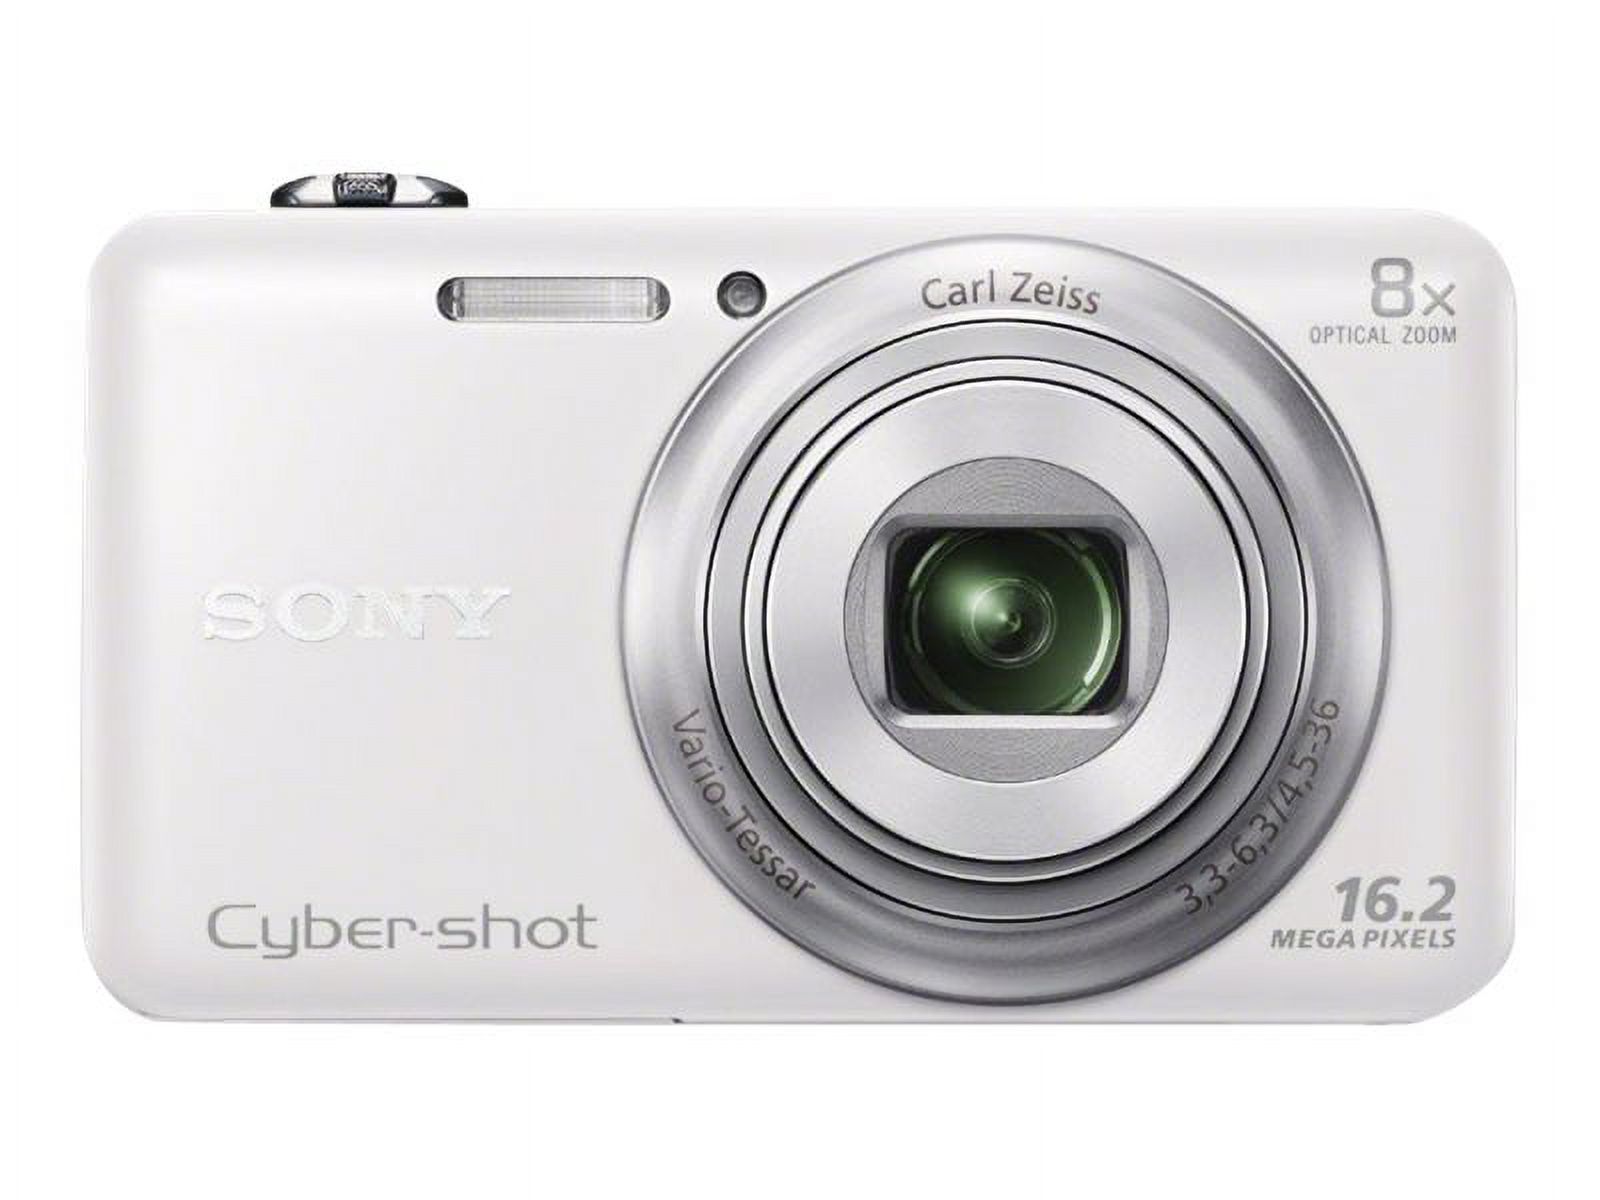 Sony Cyber-shot DSC-WX80 - Digital camera - compact - 16.2 MP - 8x optical zoom - Carl Zeiss - Wi-Fi - white - image 2 of 4